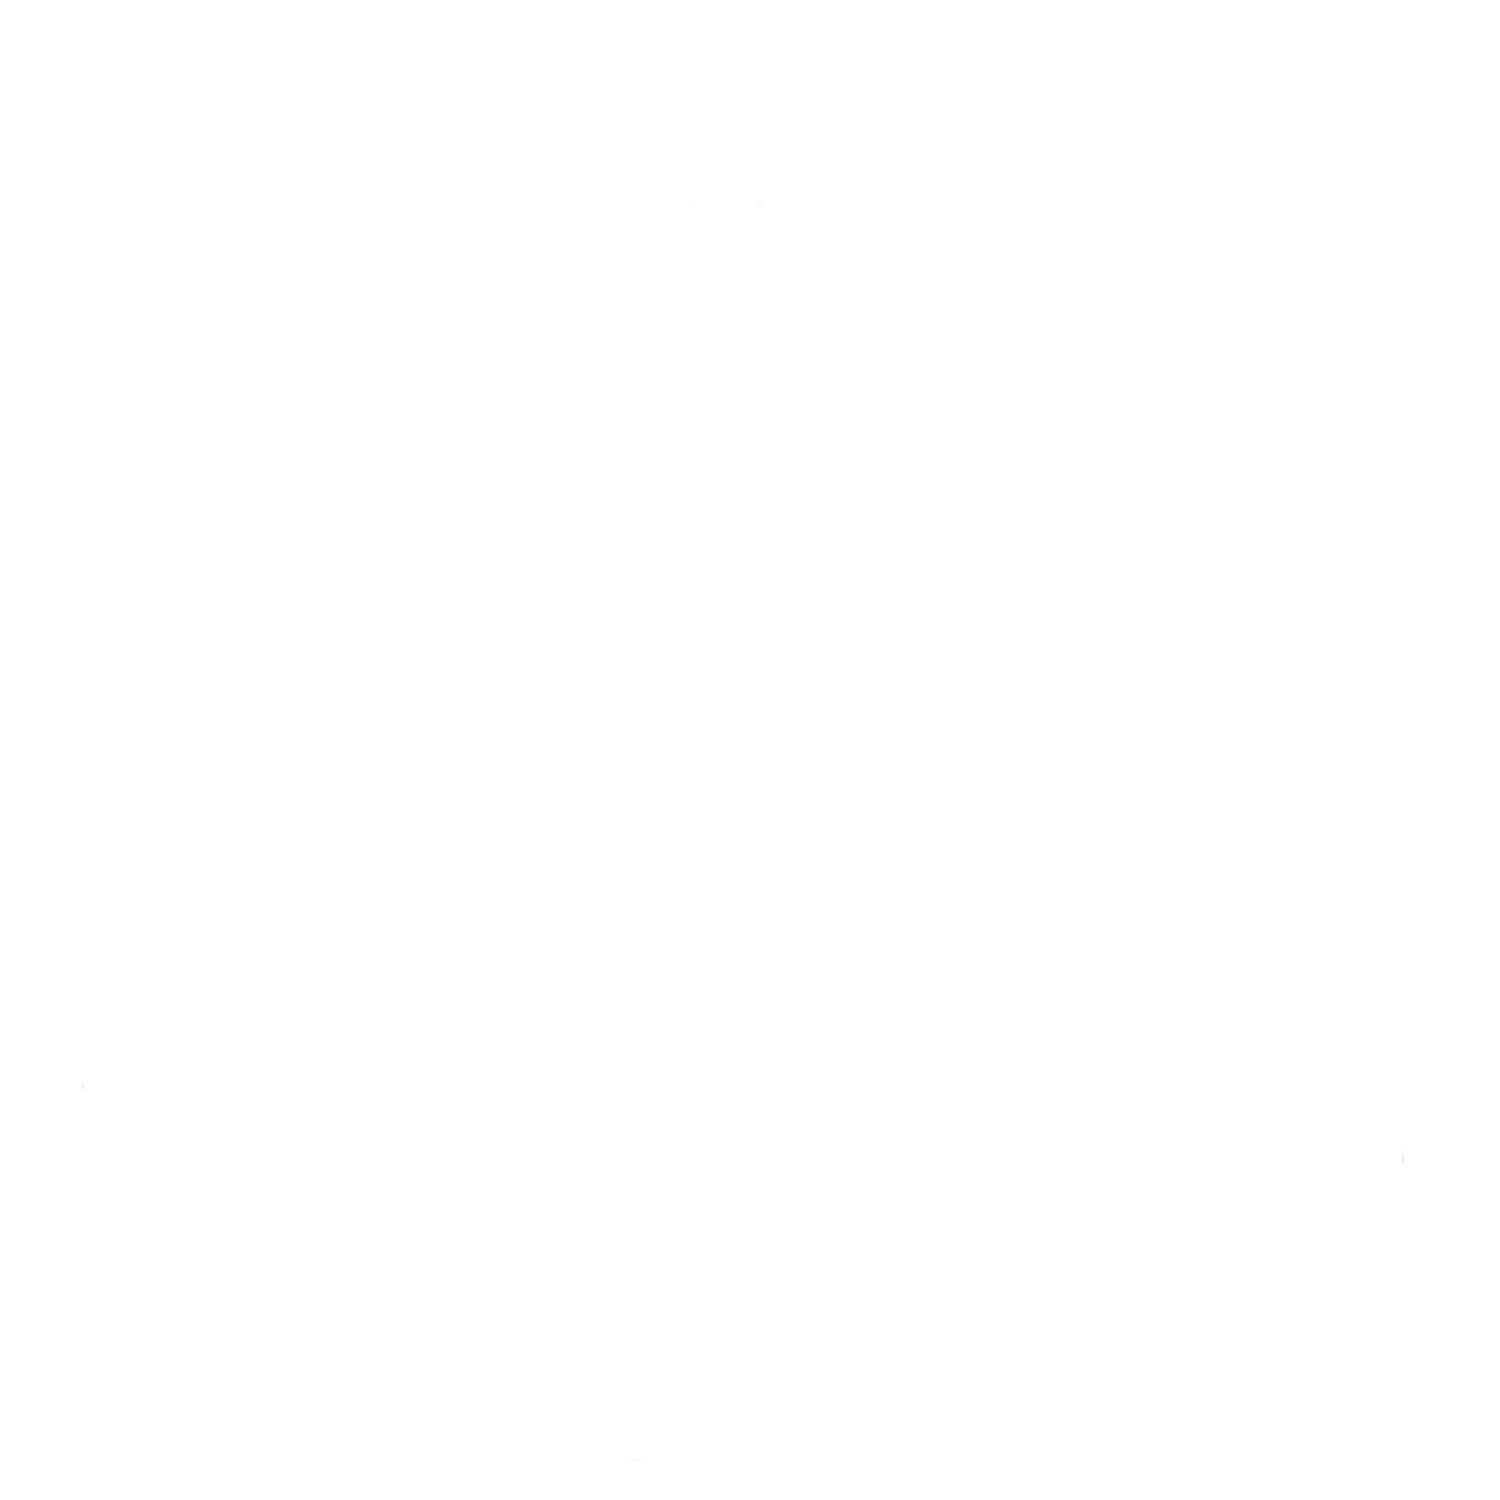 TABLE Learning Resources